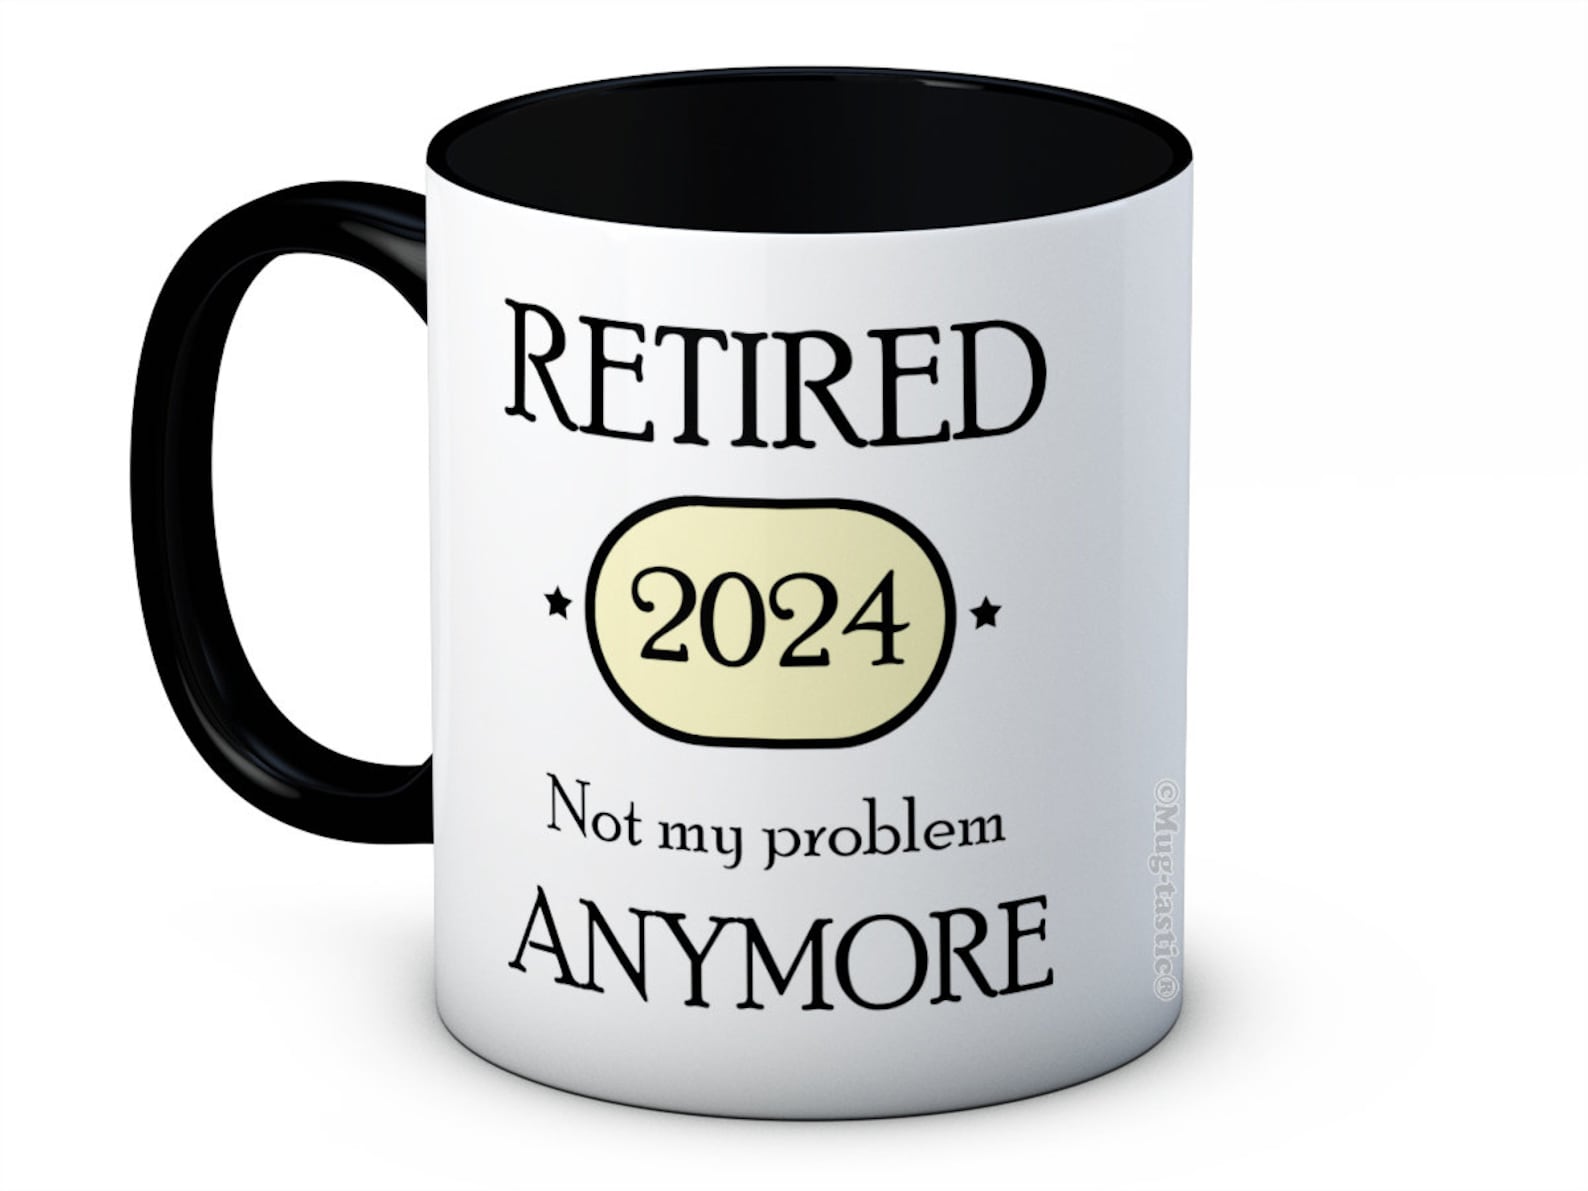 Retired 2024 Not My Problem Anymore Retirement Gift - Ceramic Coffee Mug - image 1 of 2